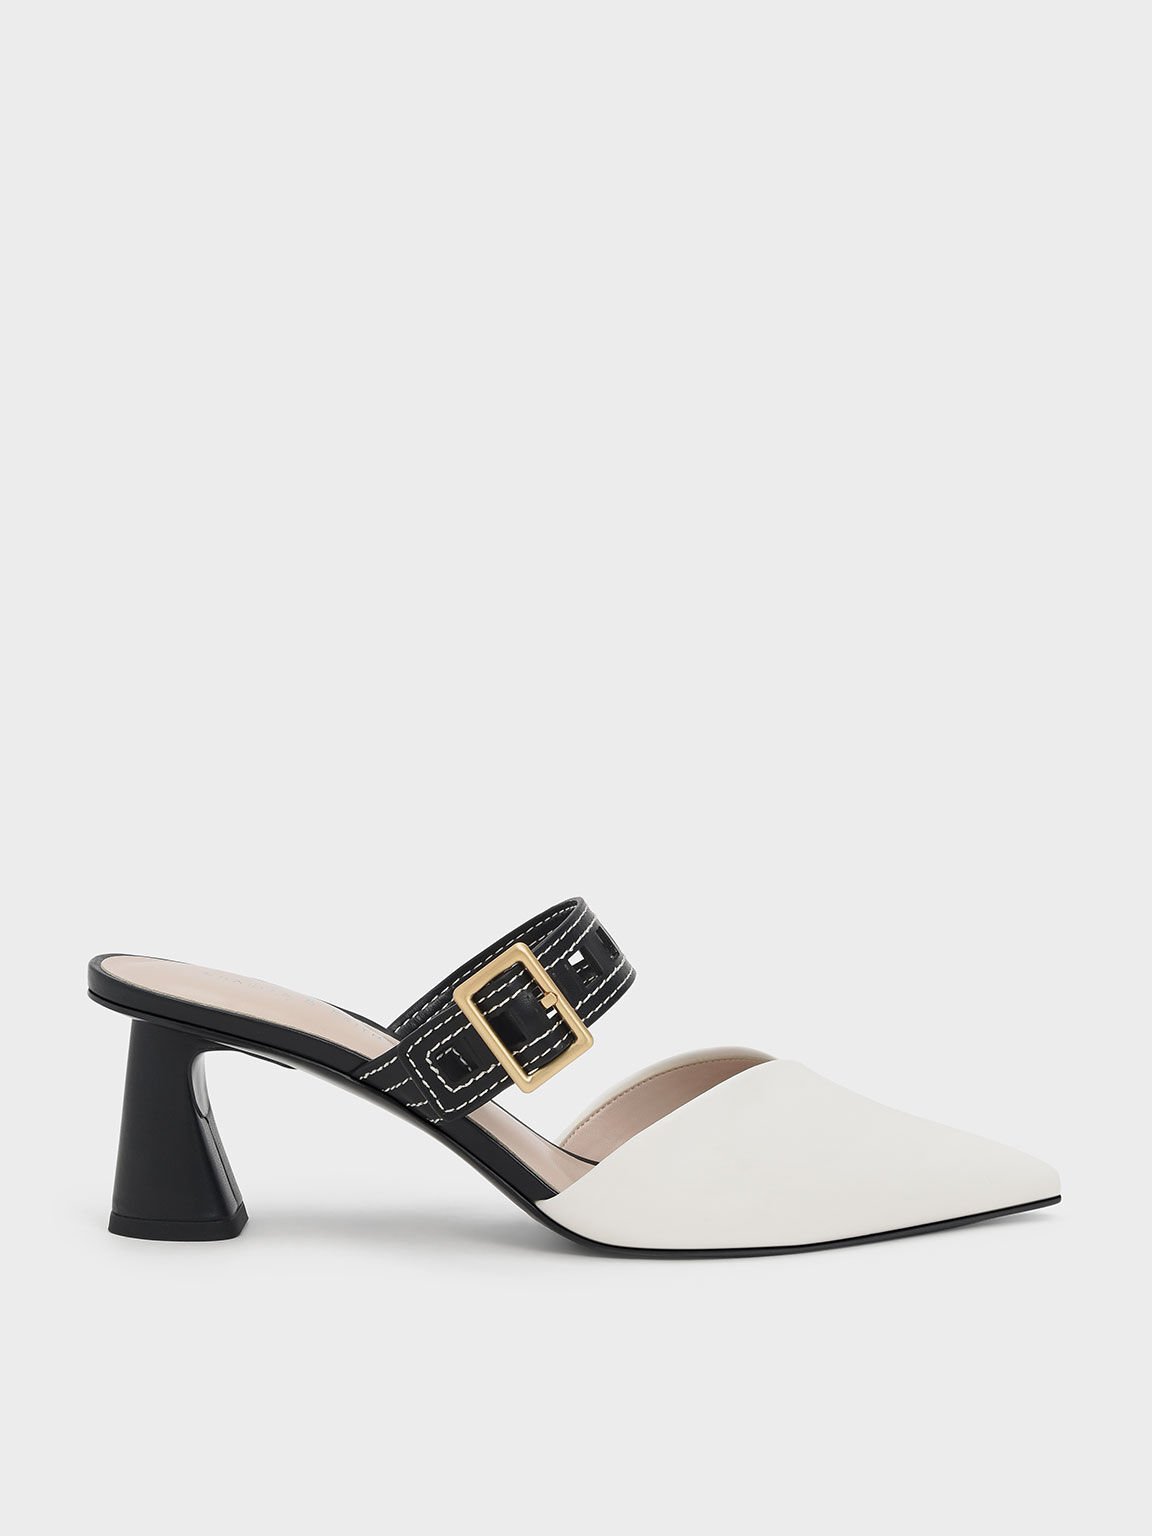 Women's Shoes | Shop Exclusive Styles | CHARLES & KEITH SA